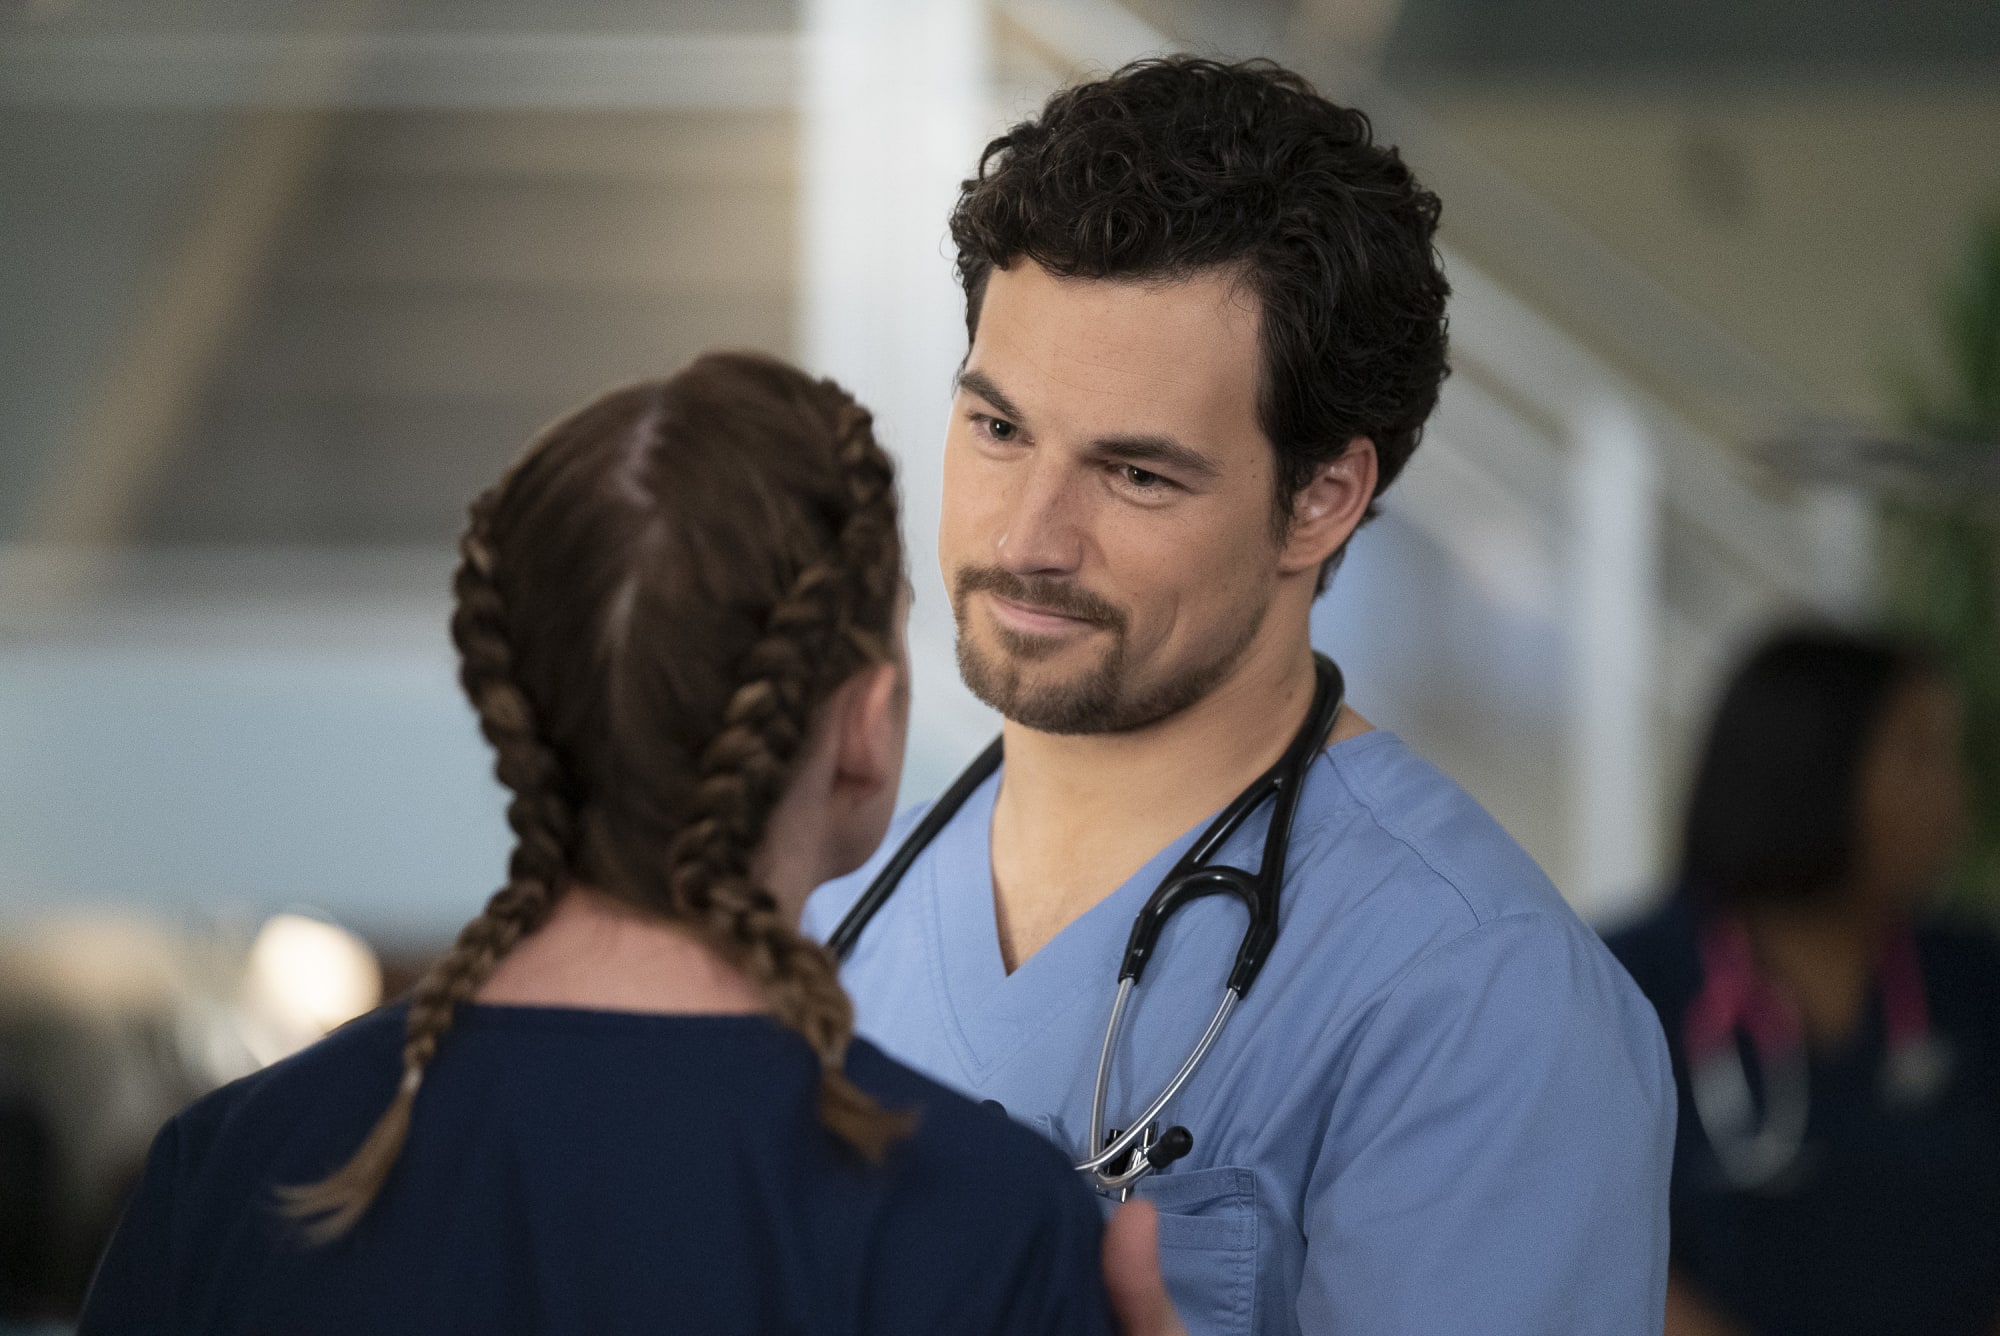 When does Grey's Anatomy return with new episodes?